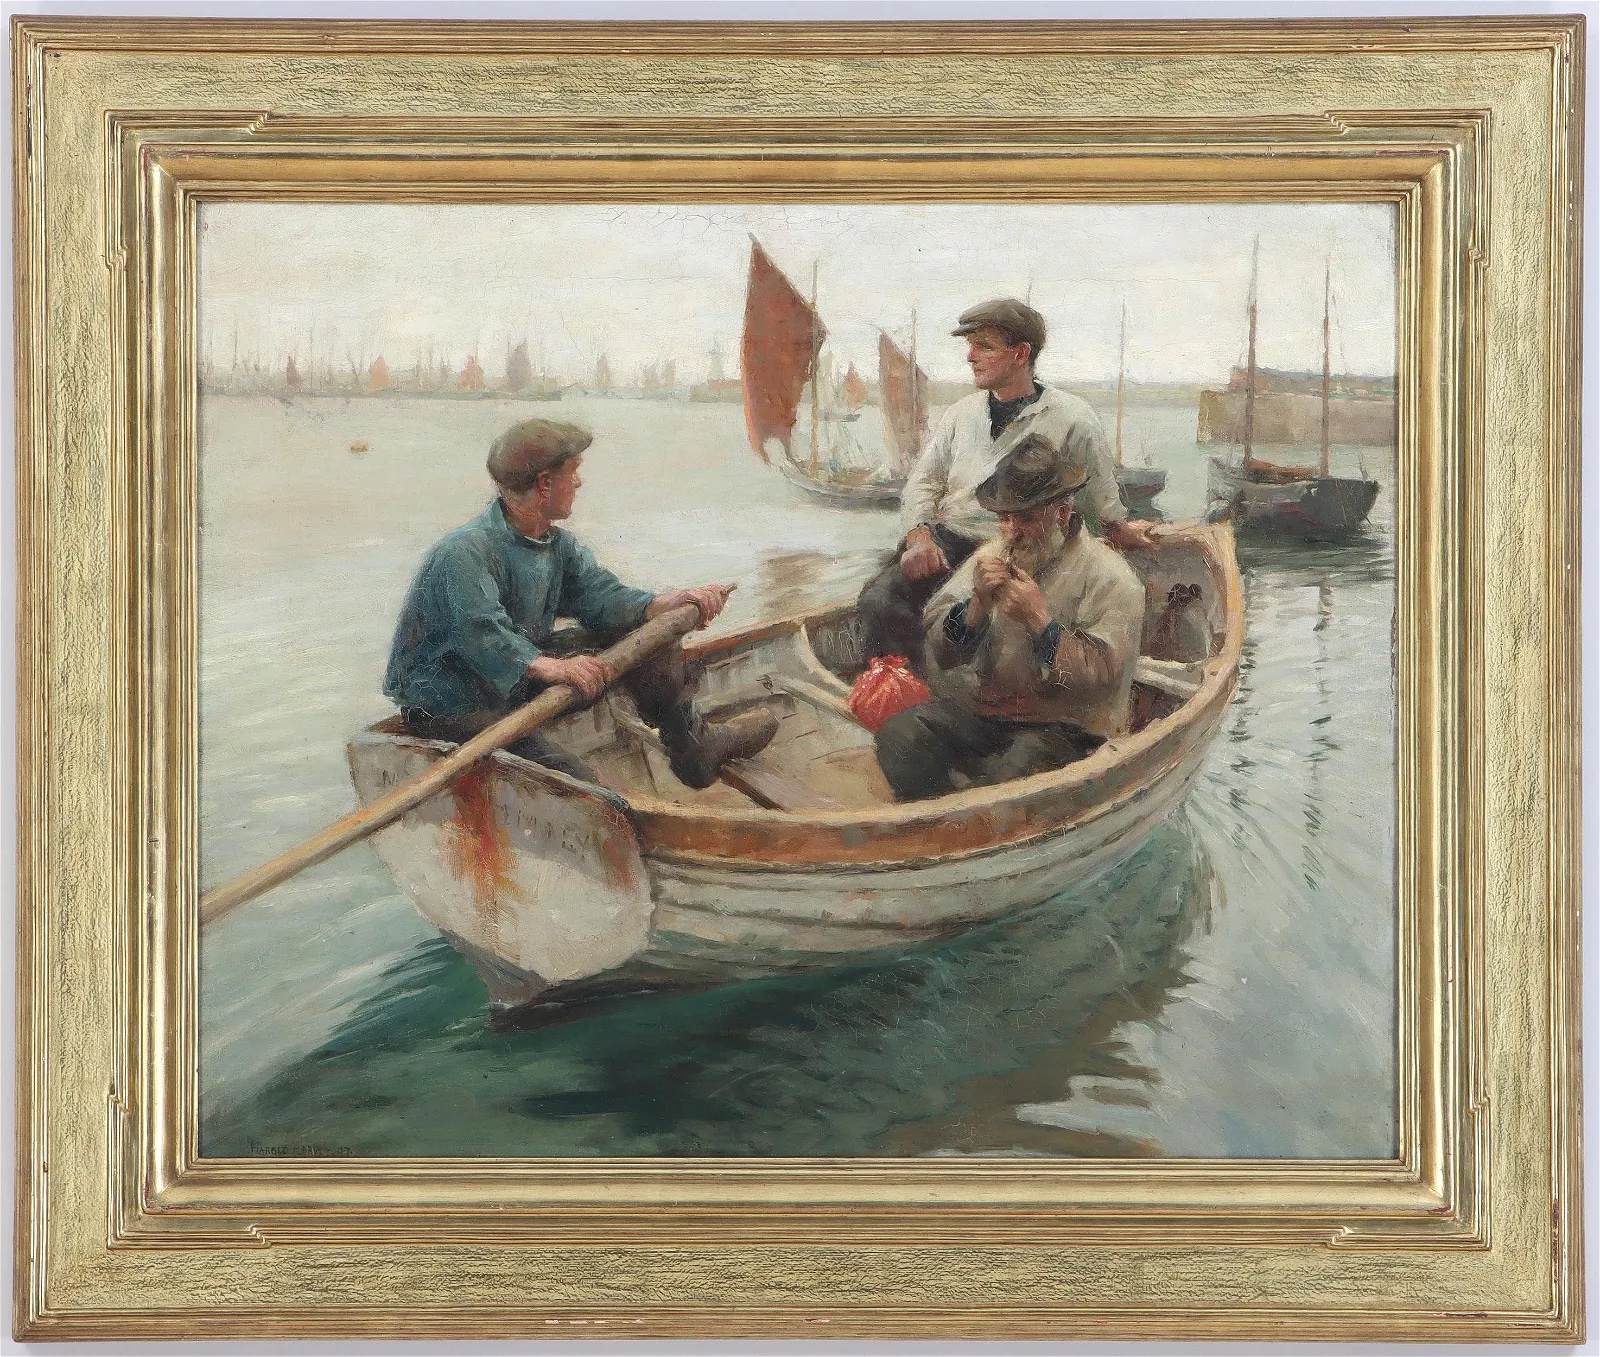 Harold Harvey, 'On the Thames,' which sold for $45,000 ($56,250 with buyer’s premium) at South Bay.